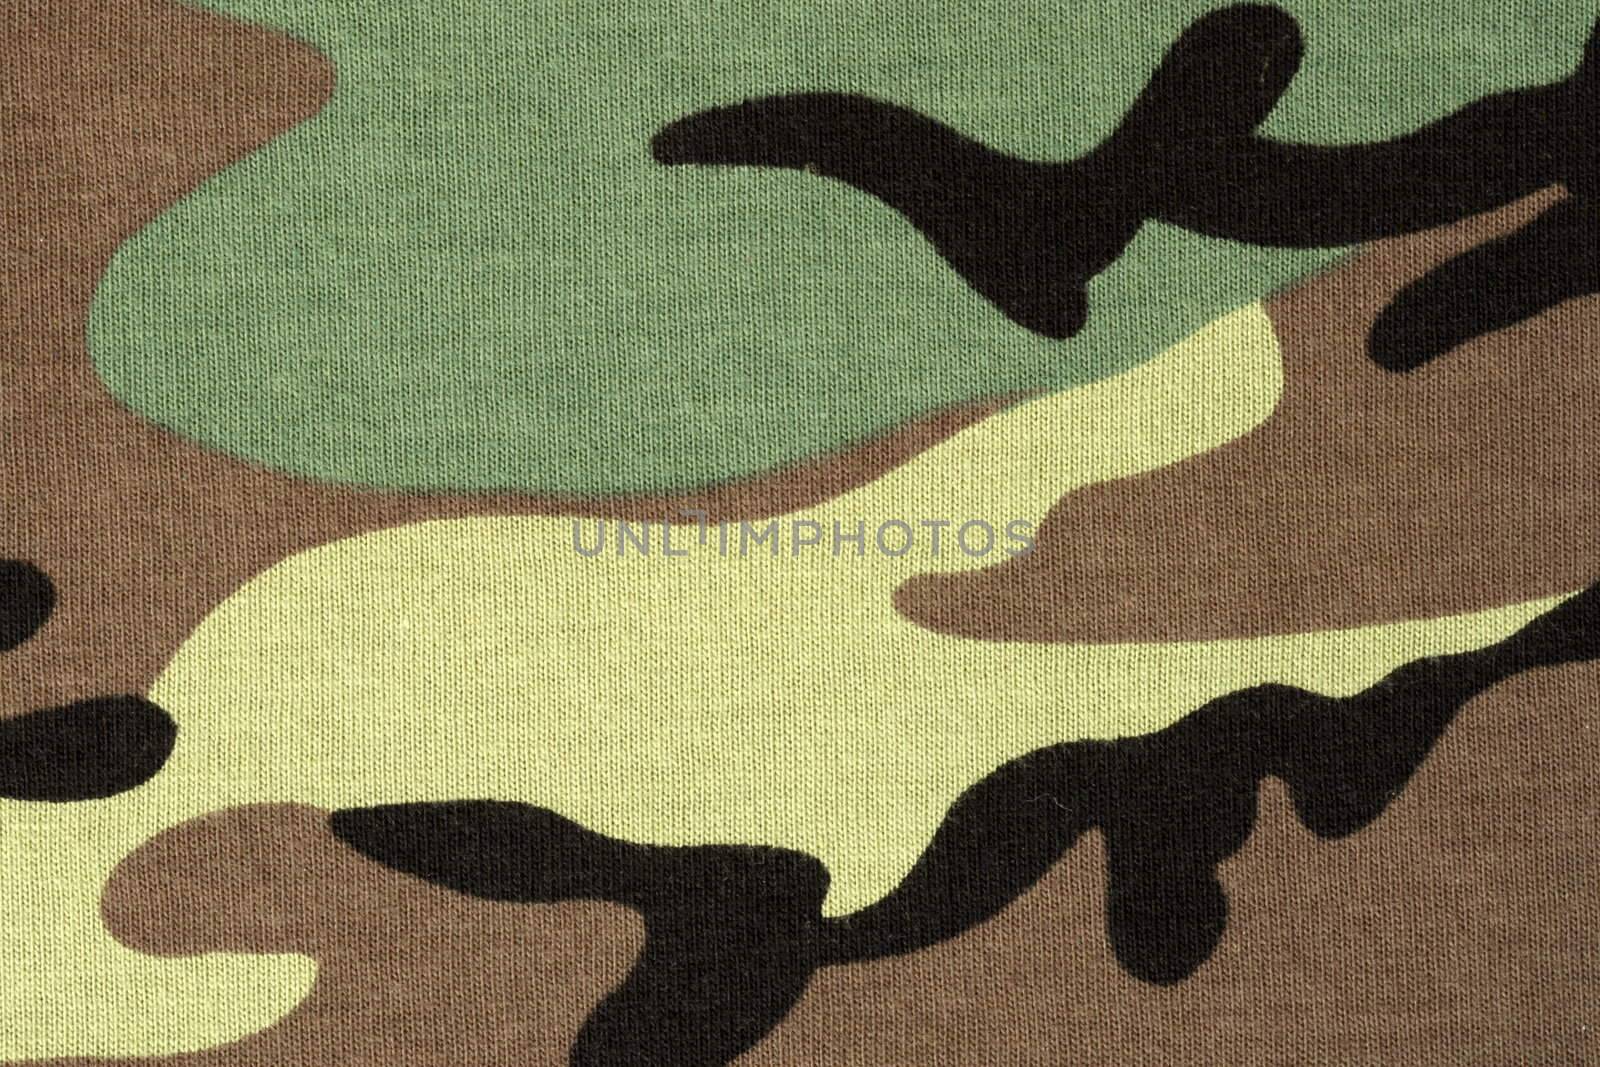 army woodland military camuoflage fabric, background  style pattern, new fabric